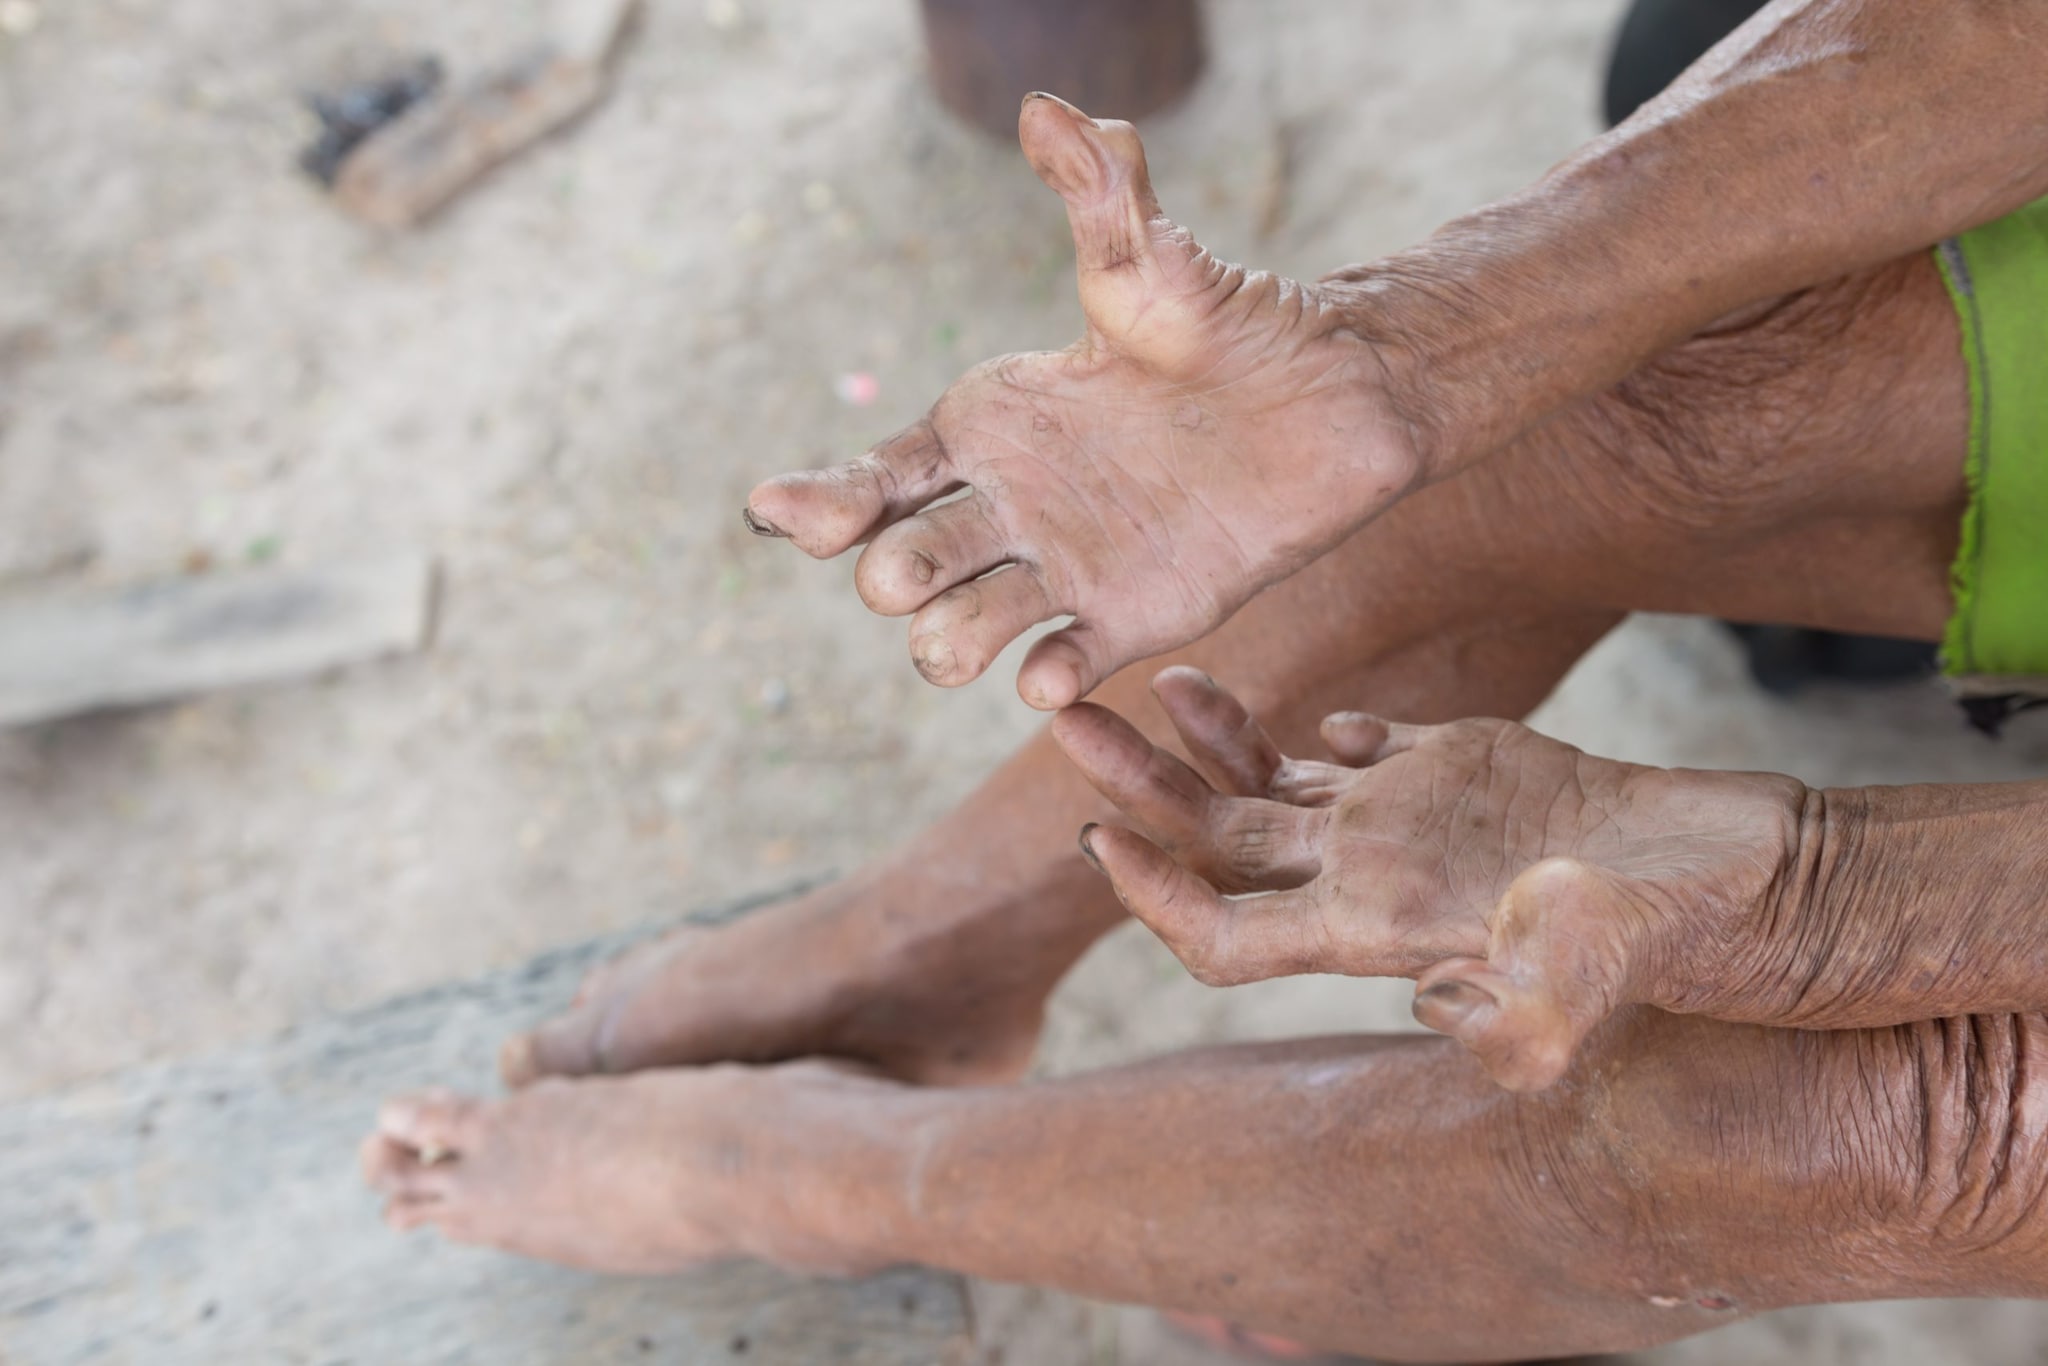 A person with untreated Hansen's disease shows their hands and feet.